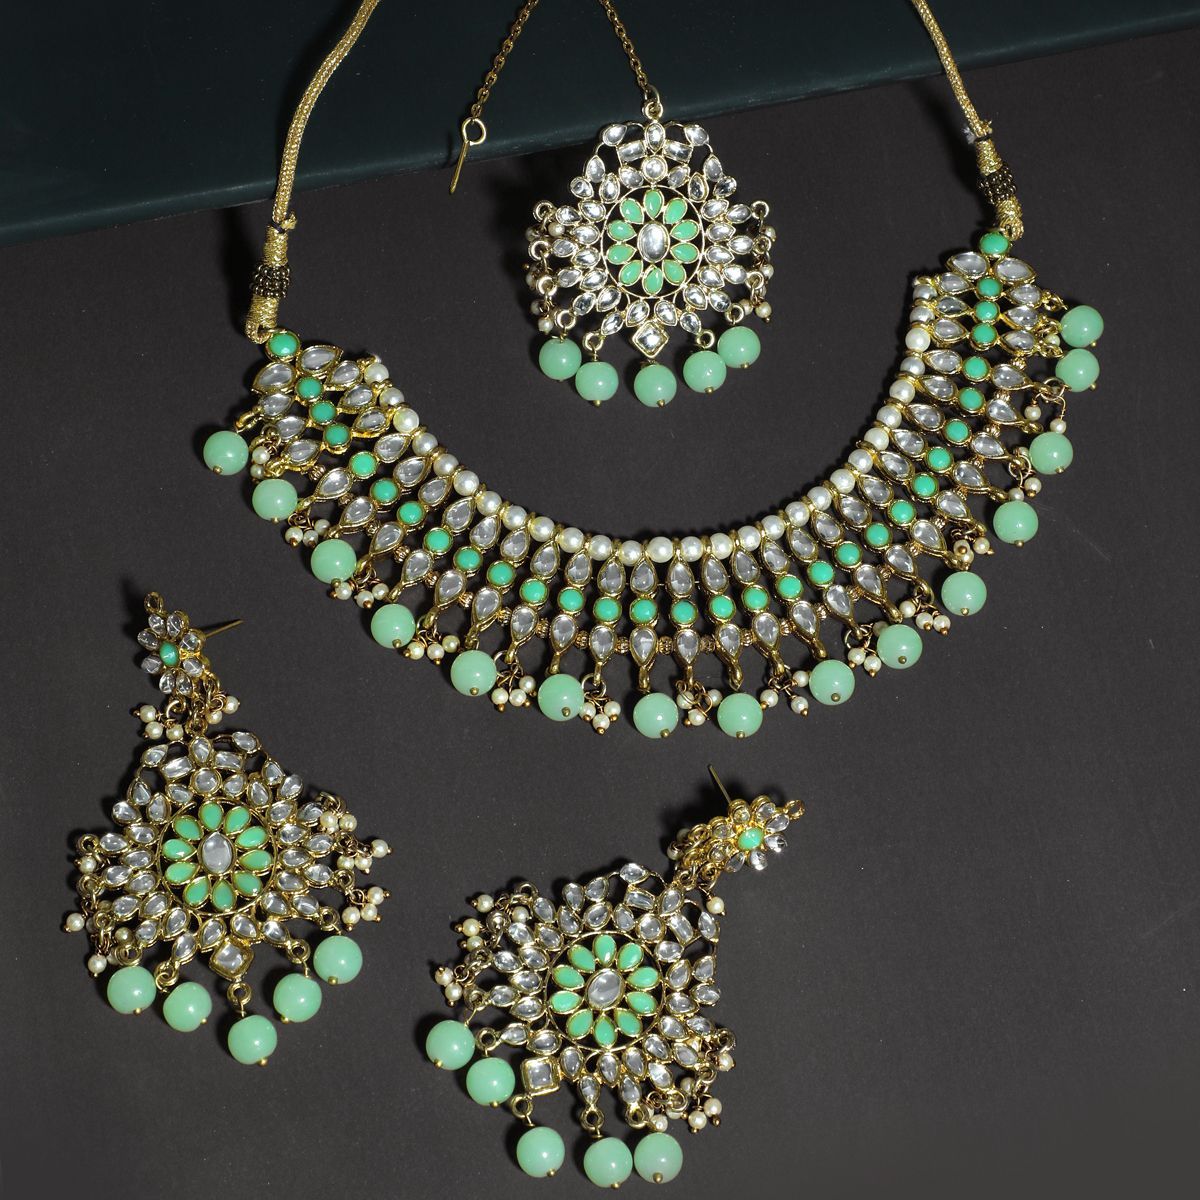 Peach  Green Necklace with Earring and Maang Tikka Jewellery Set with  Kundan  Pearls  DugriStyle